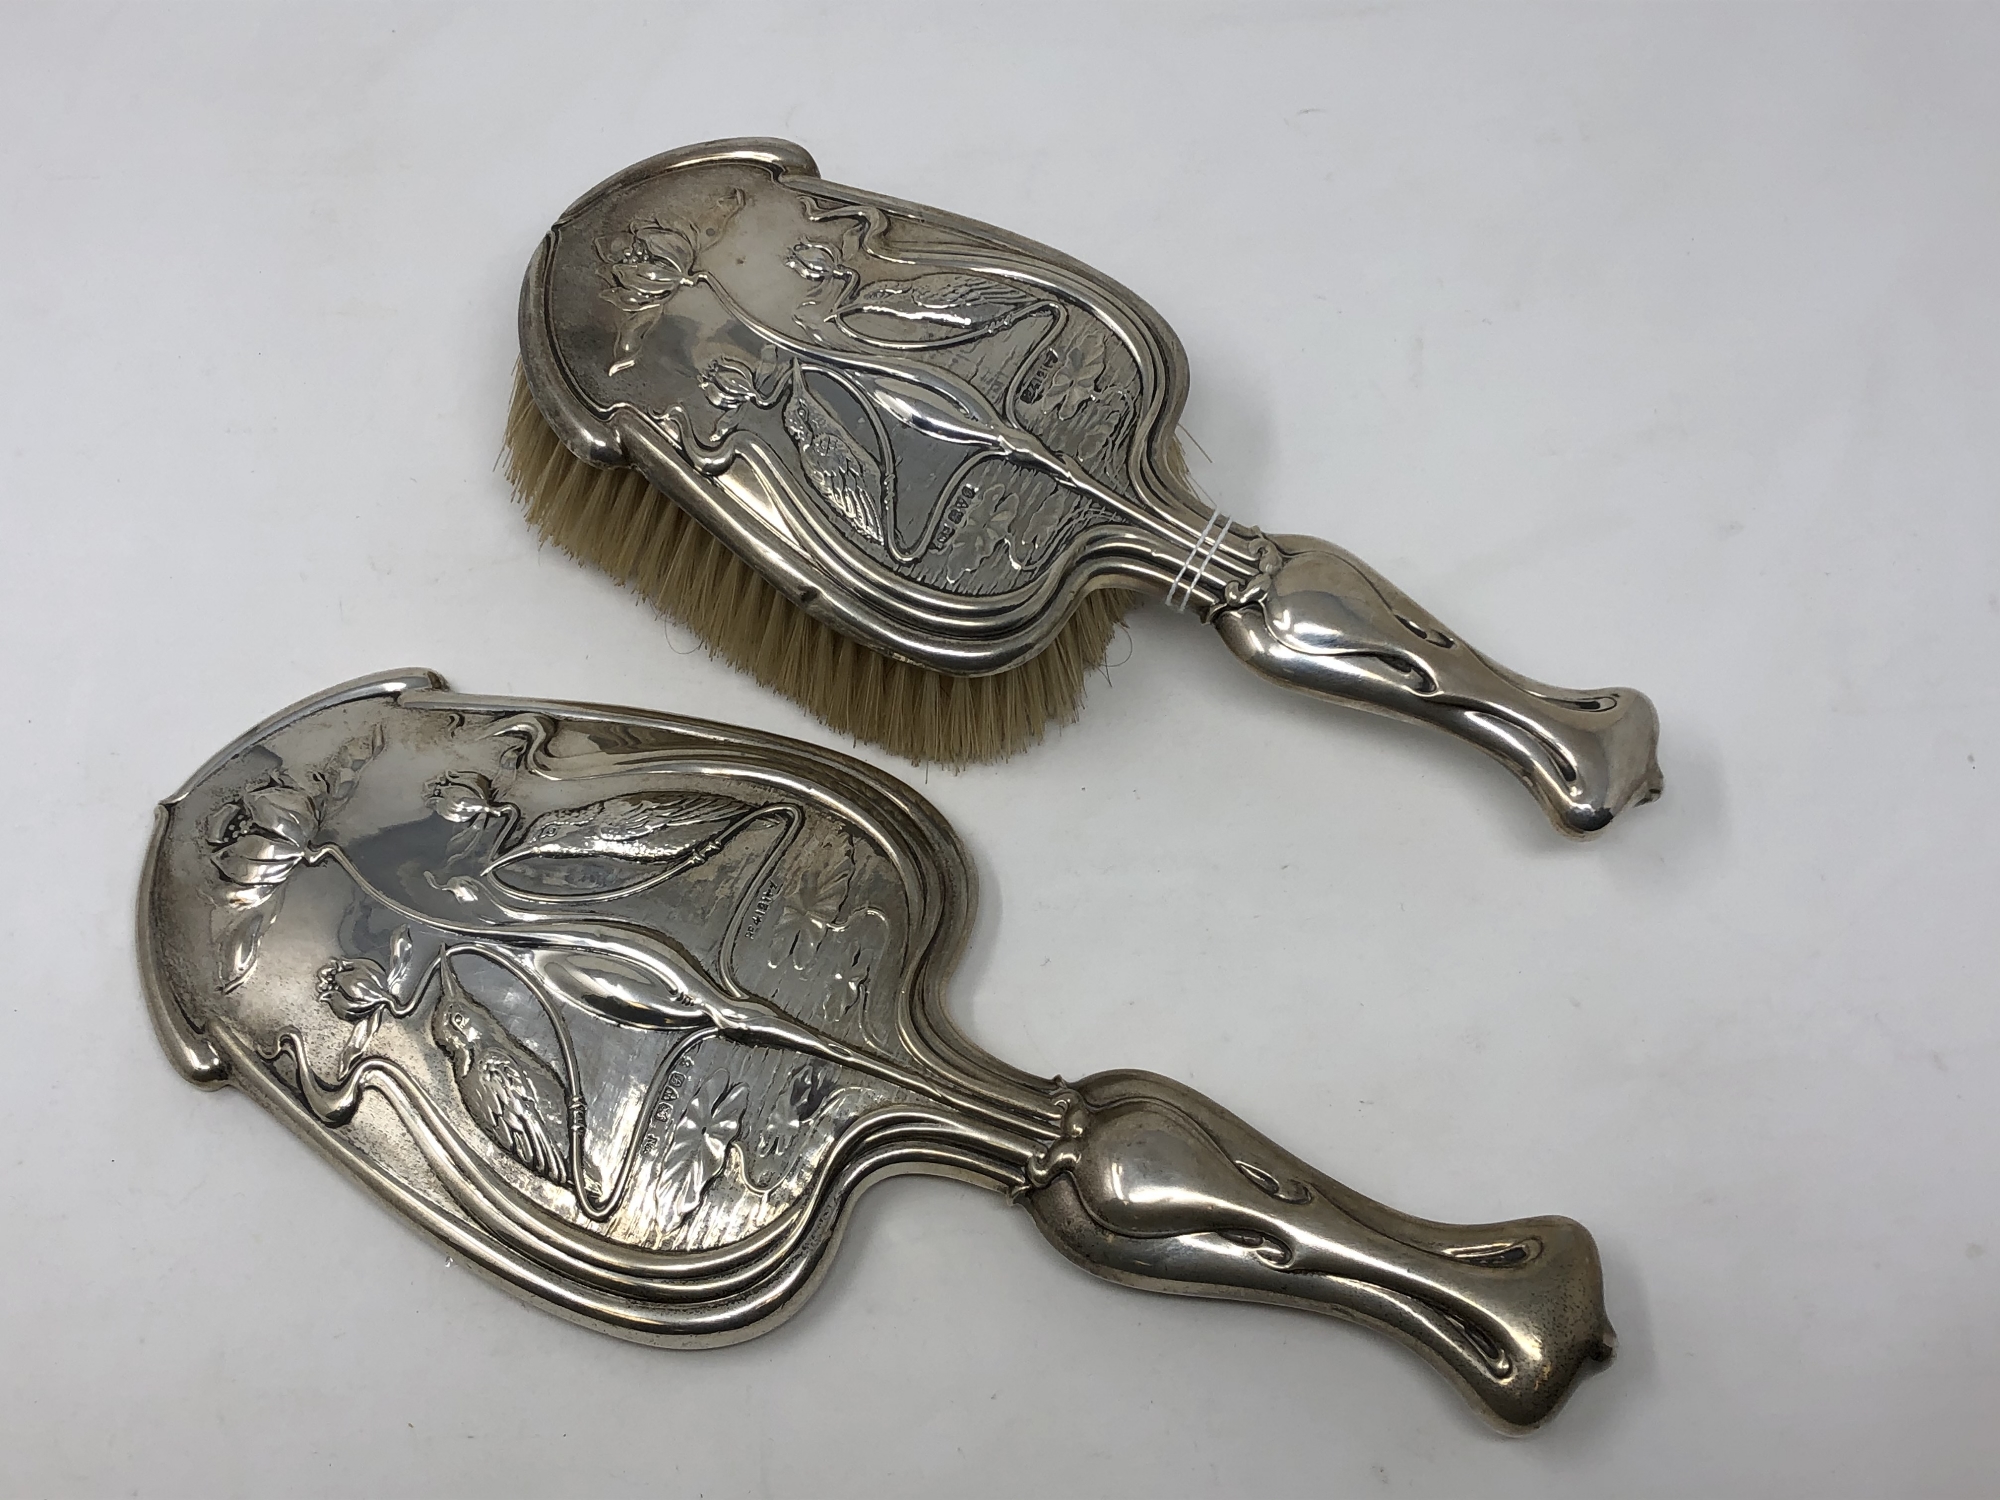 A fine quality Art Nouveau brush and hand mirror depicting kingfishers